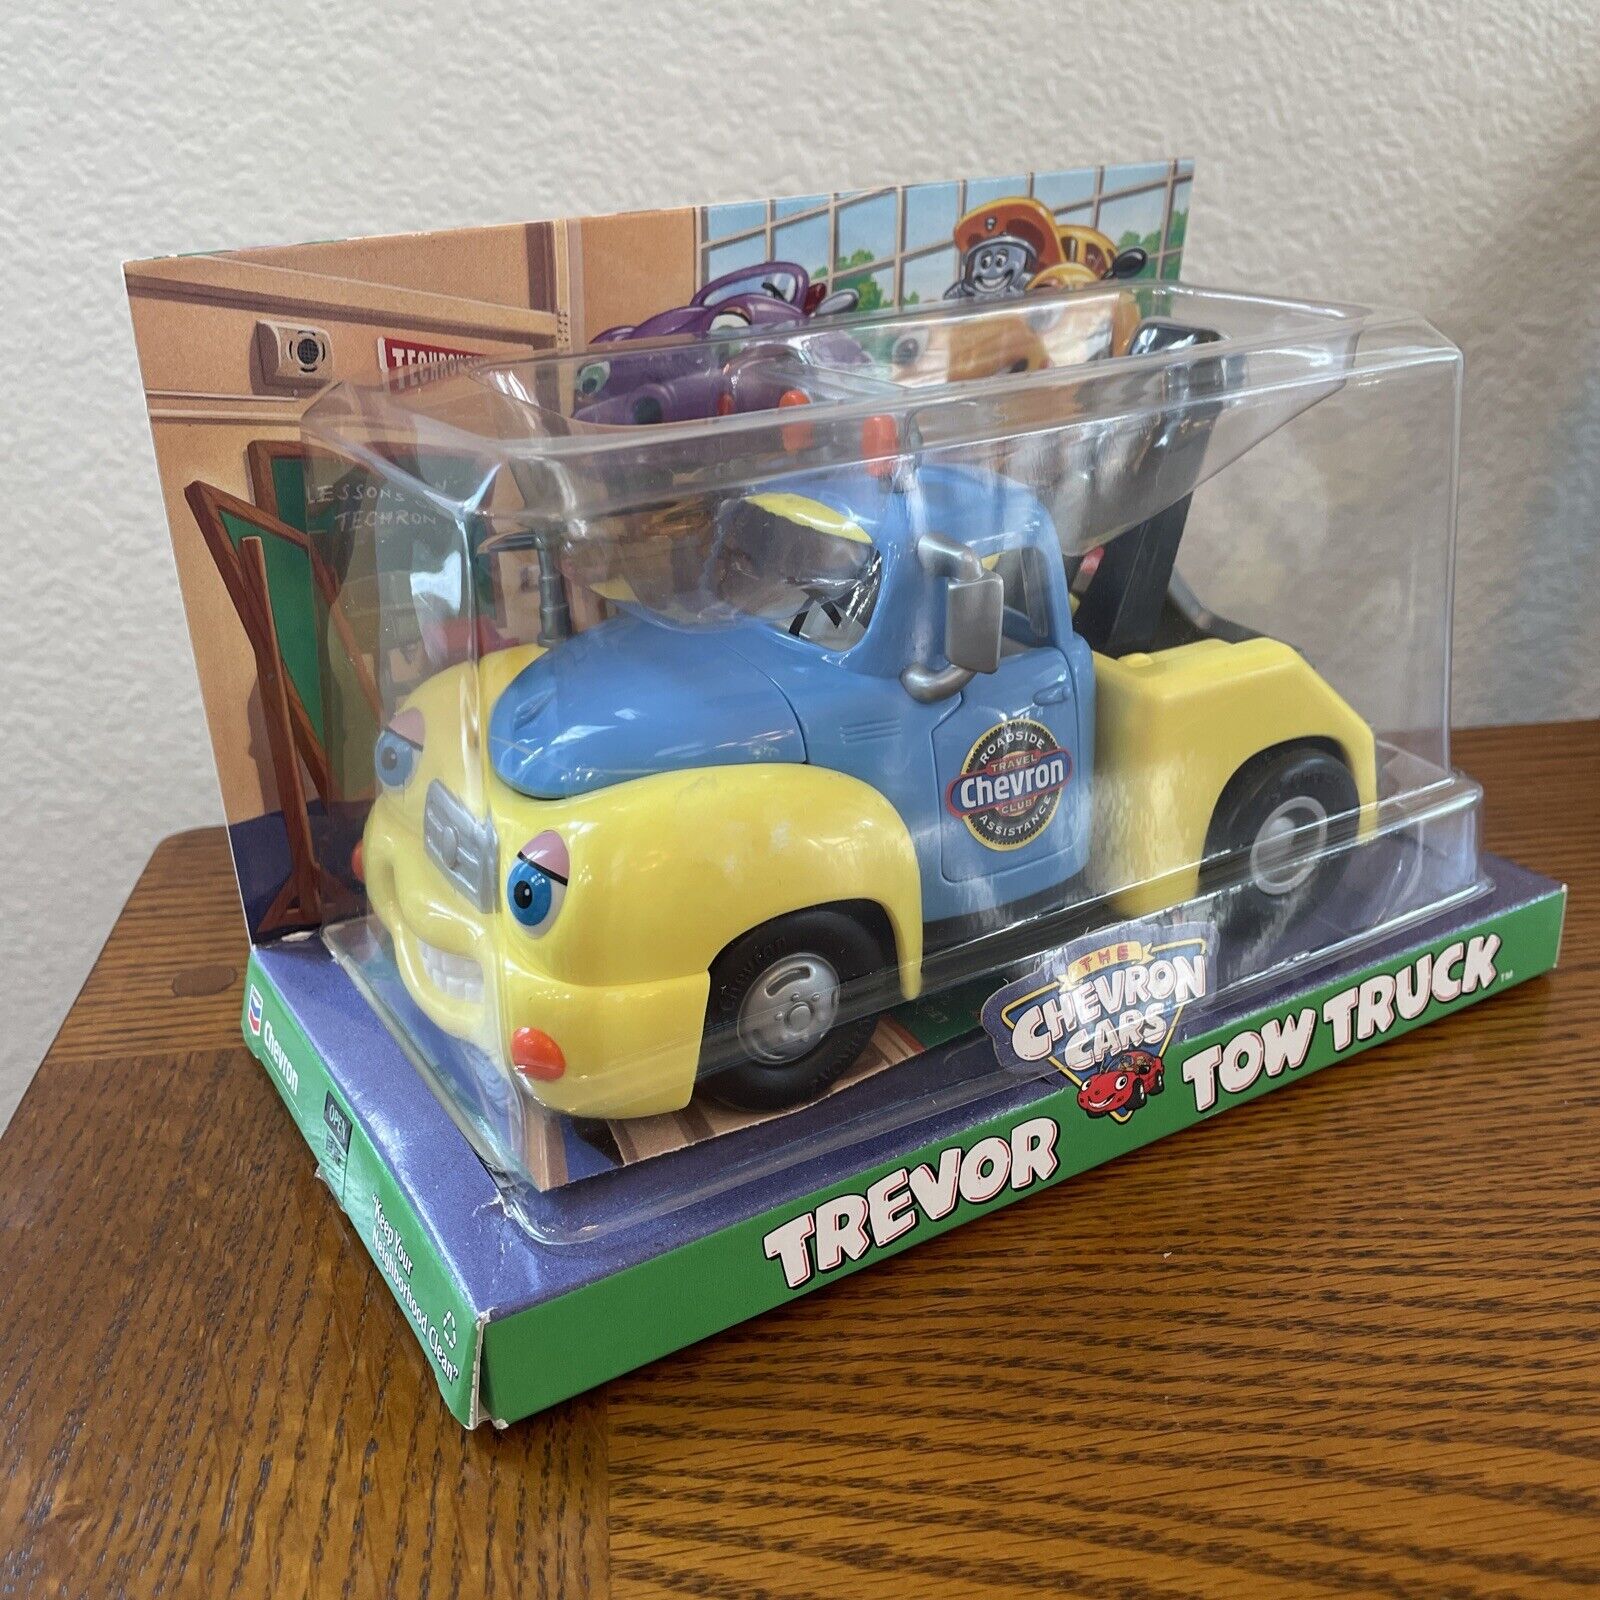 Trevor Tow Truck, Vintage Chevron Cars, 2001 collectible toy car, new in box